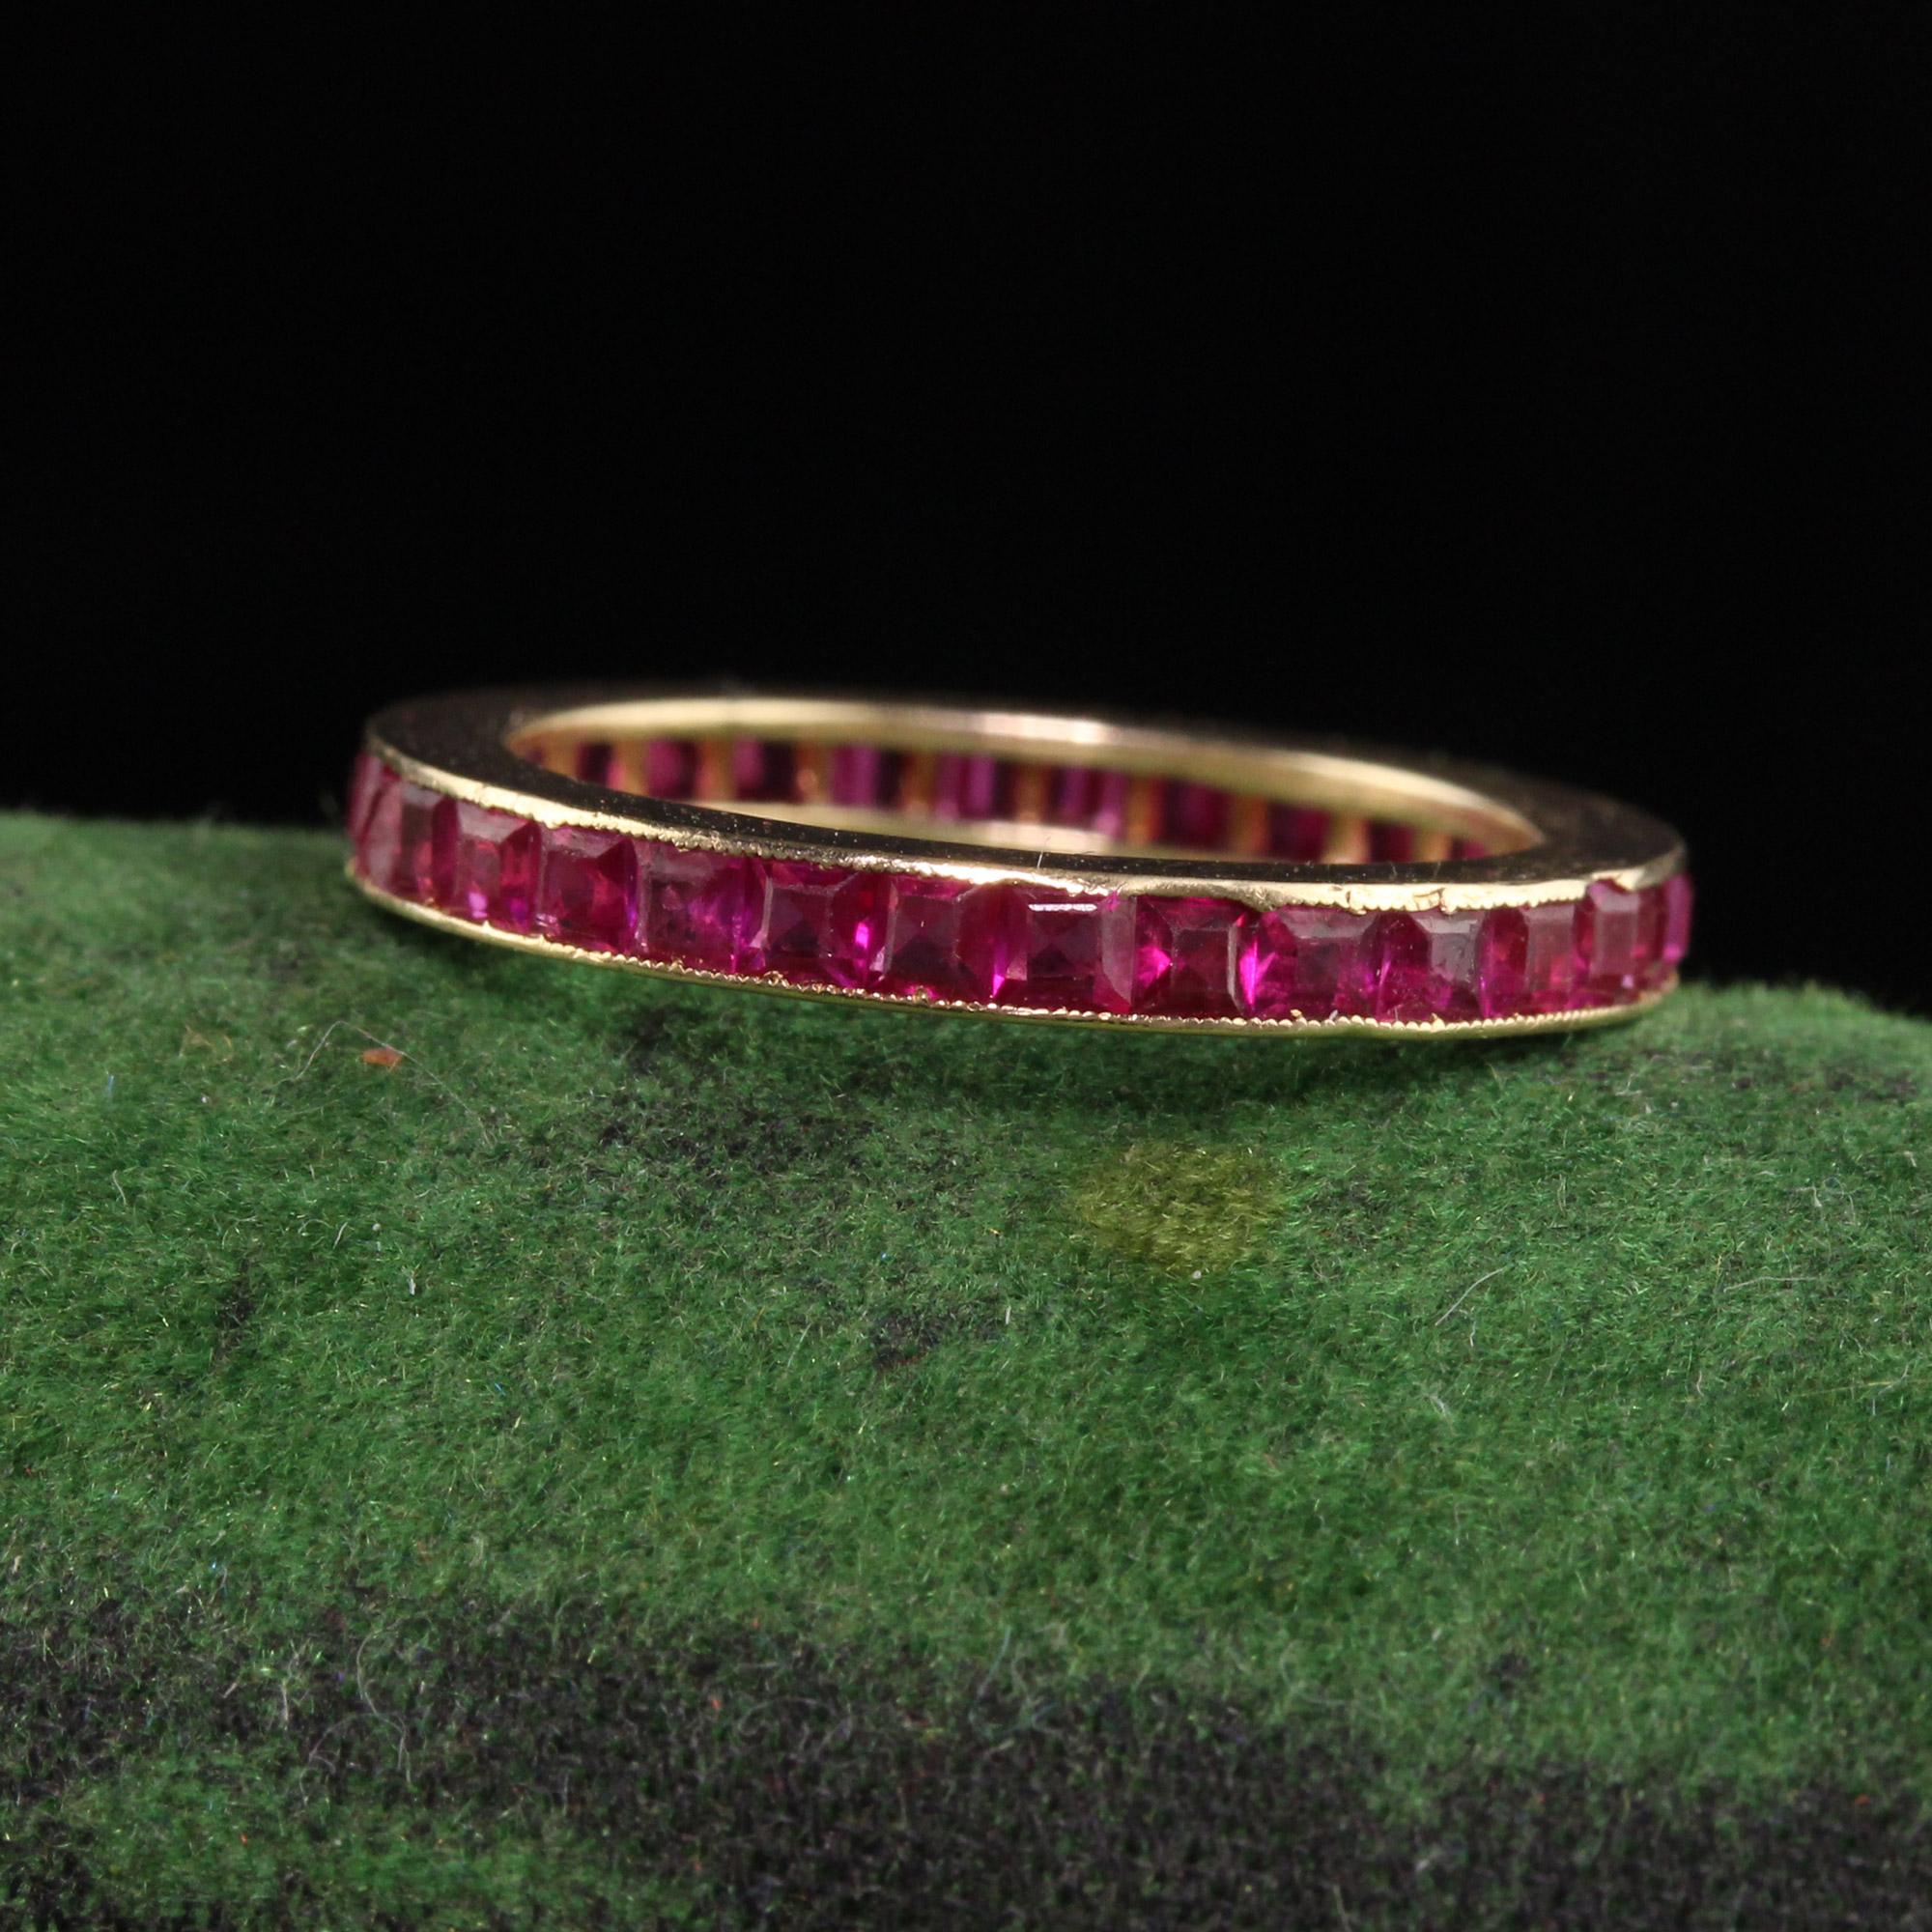 Beautiful Antique Art Deco 14K Yellow Gold Burma Ruby Eternity Band - Size 4 3/4. This gorgeous band has square Burmese rubies set all the way around the band and is in good condition. The rubies are very bright and glow.

Item #R1057

Metal: 14K